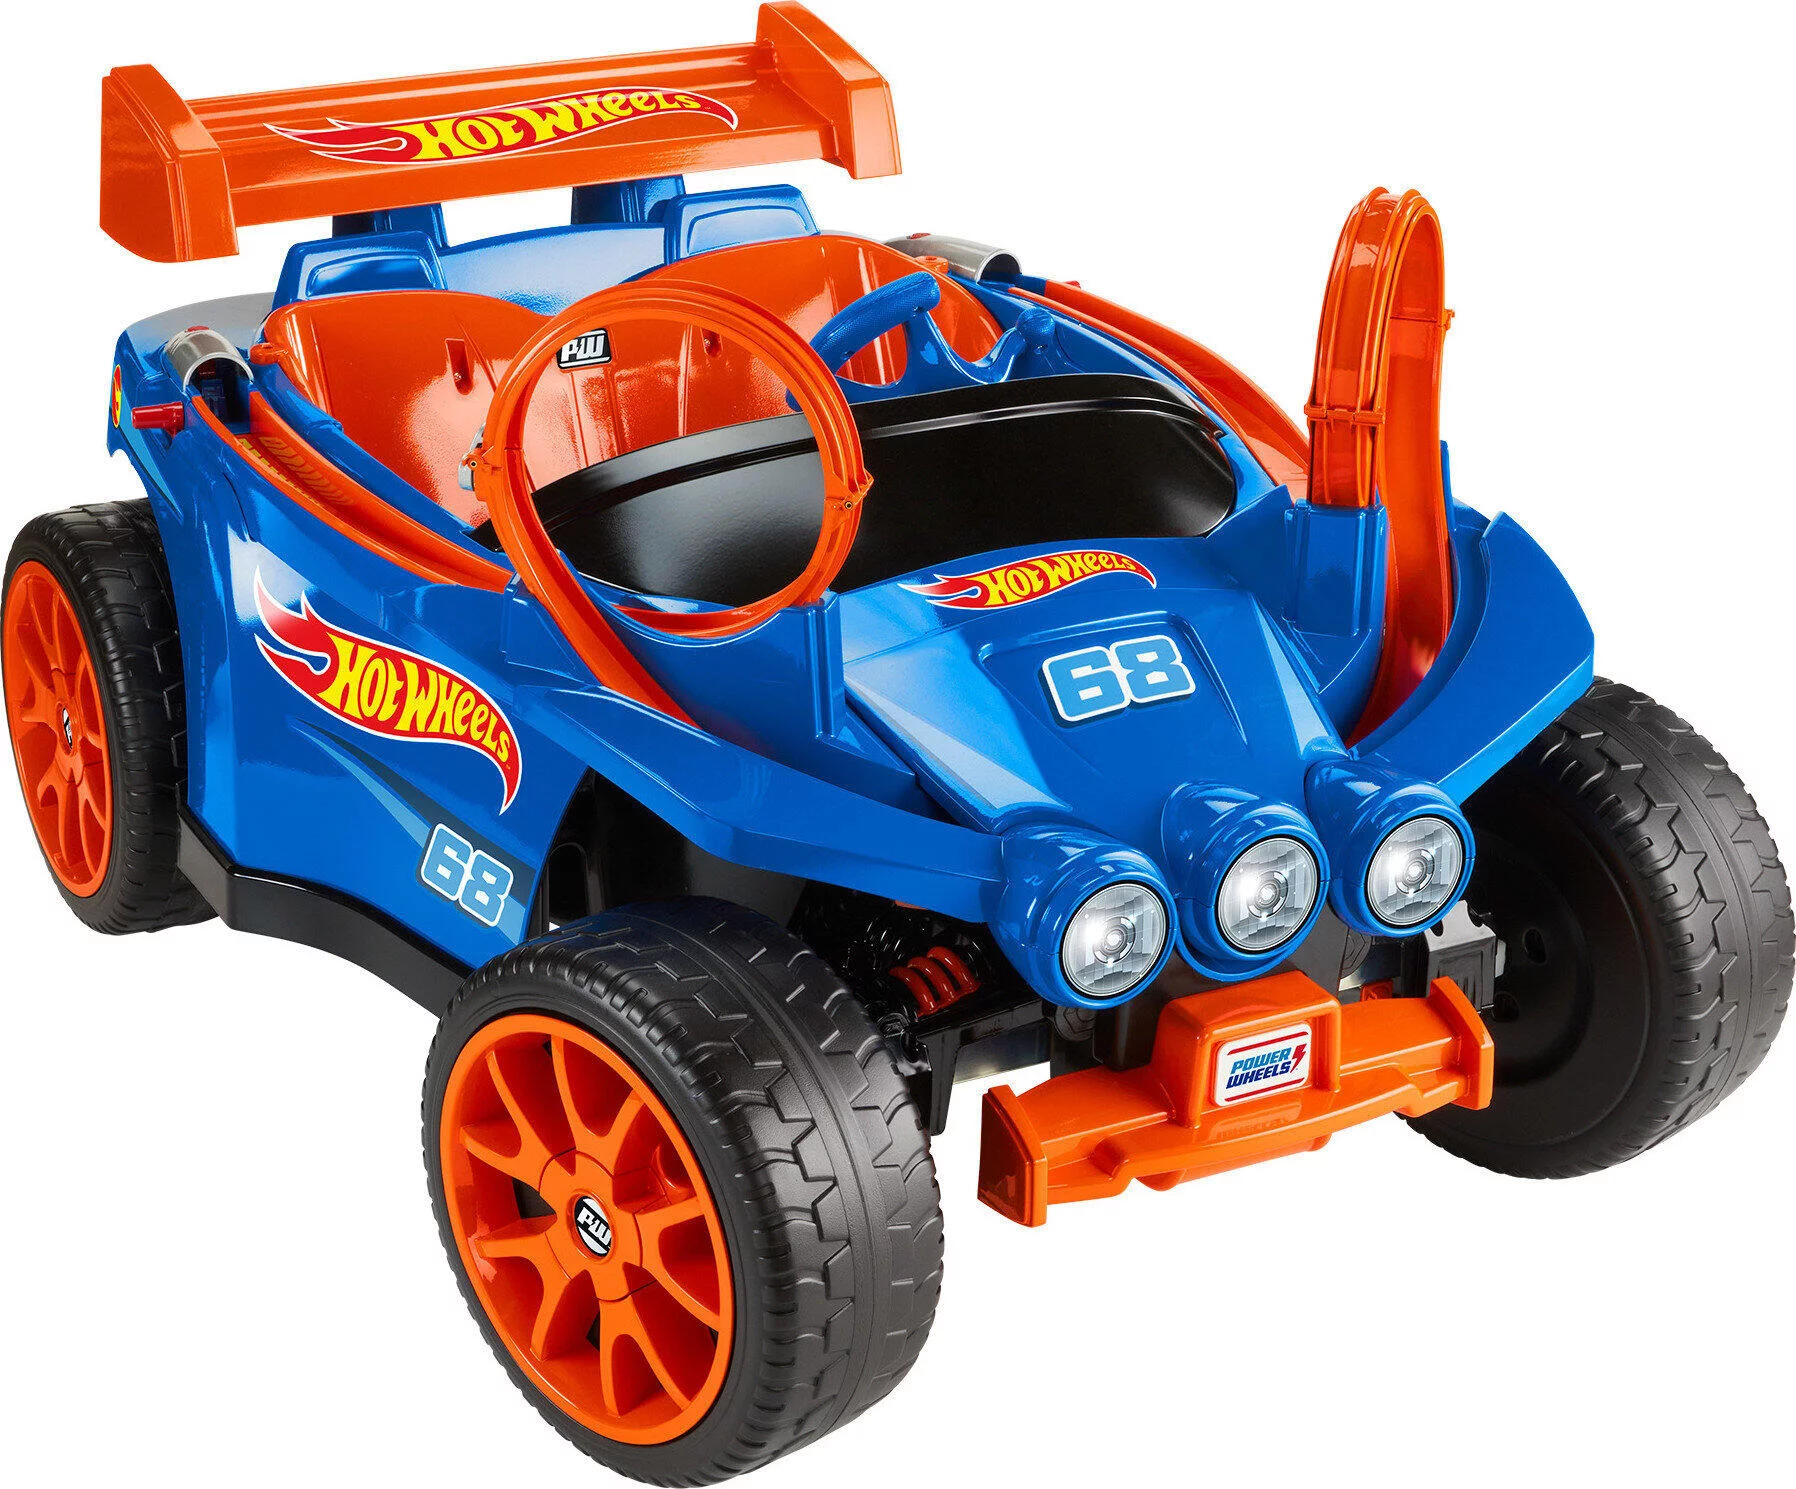 Power Wheels Hot Wheels Racer Battery-Powered Ride-on, 12 V, Max Speed: 5 mph